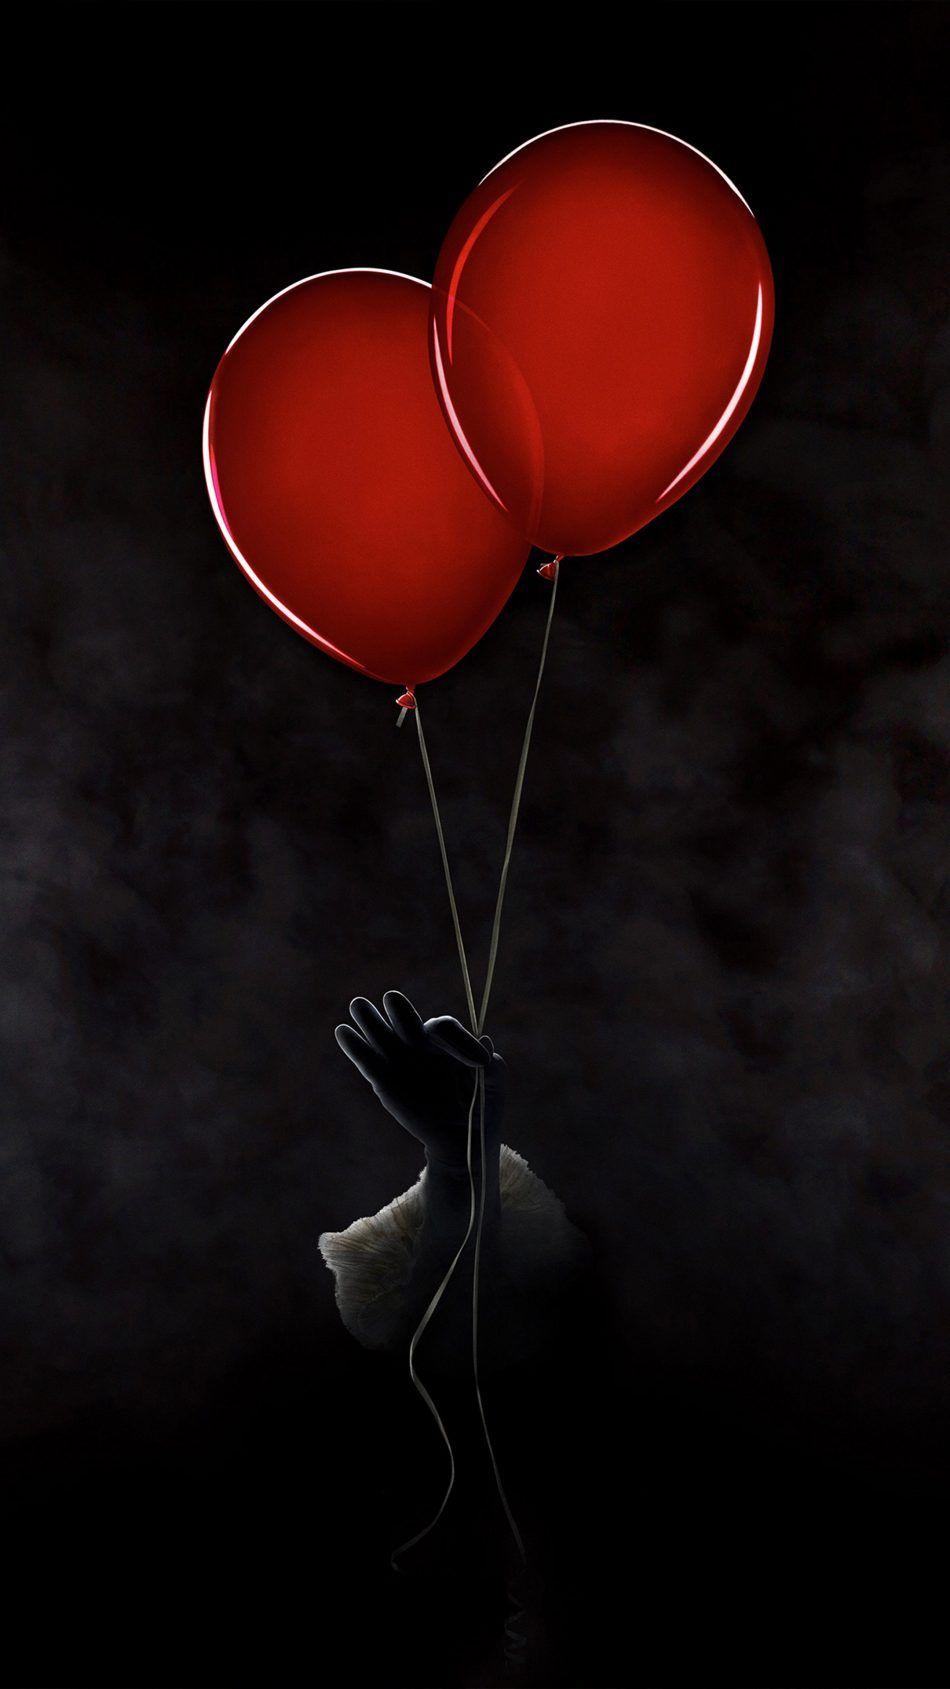 IT Chapter Two 2019. Scary wallpaper, iPhone wallpaper, Cool